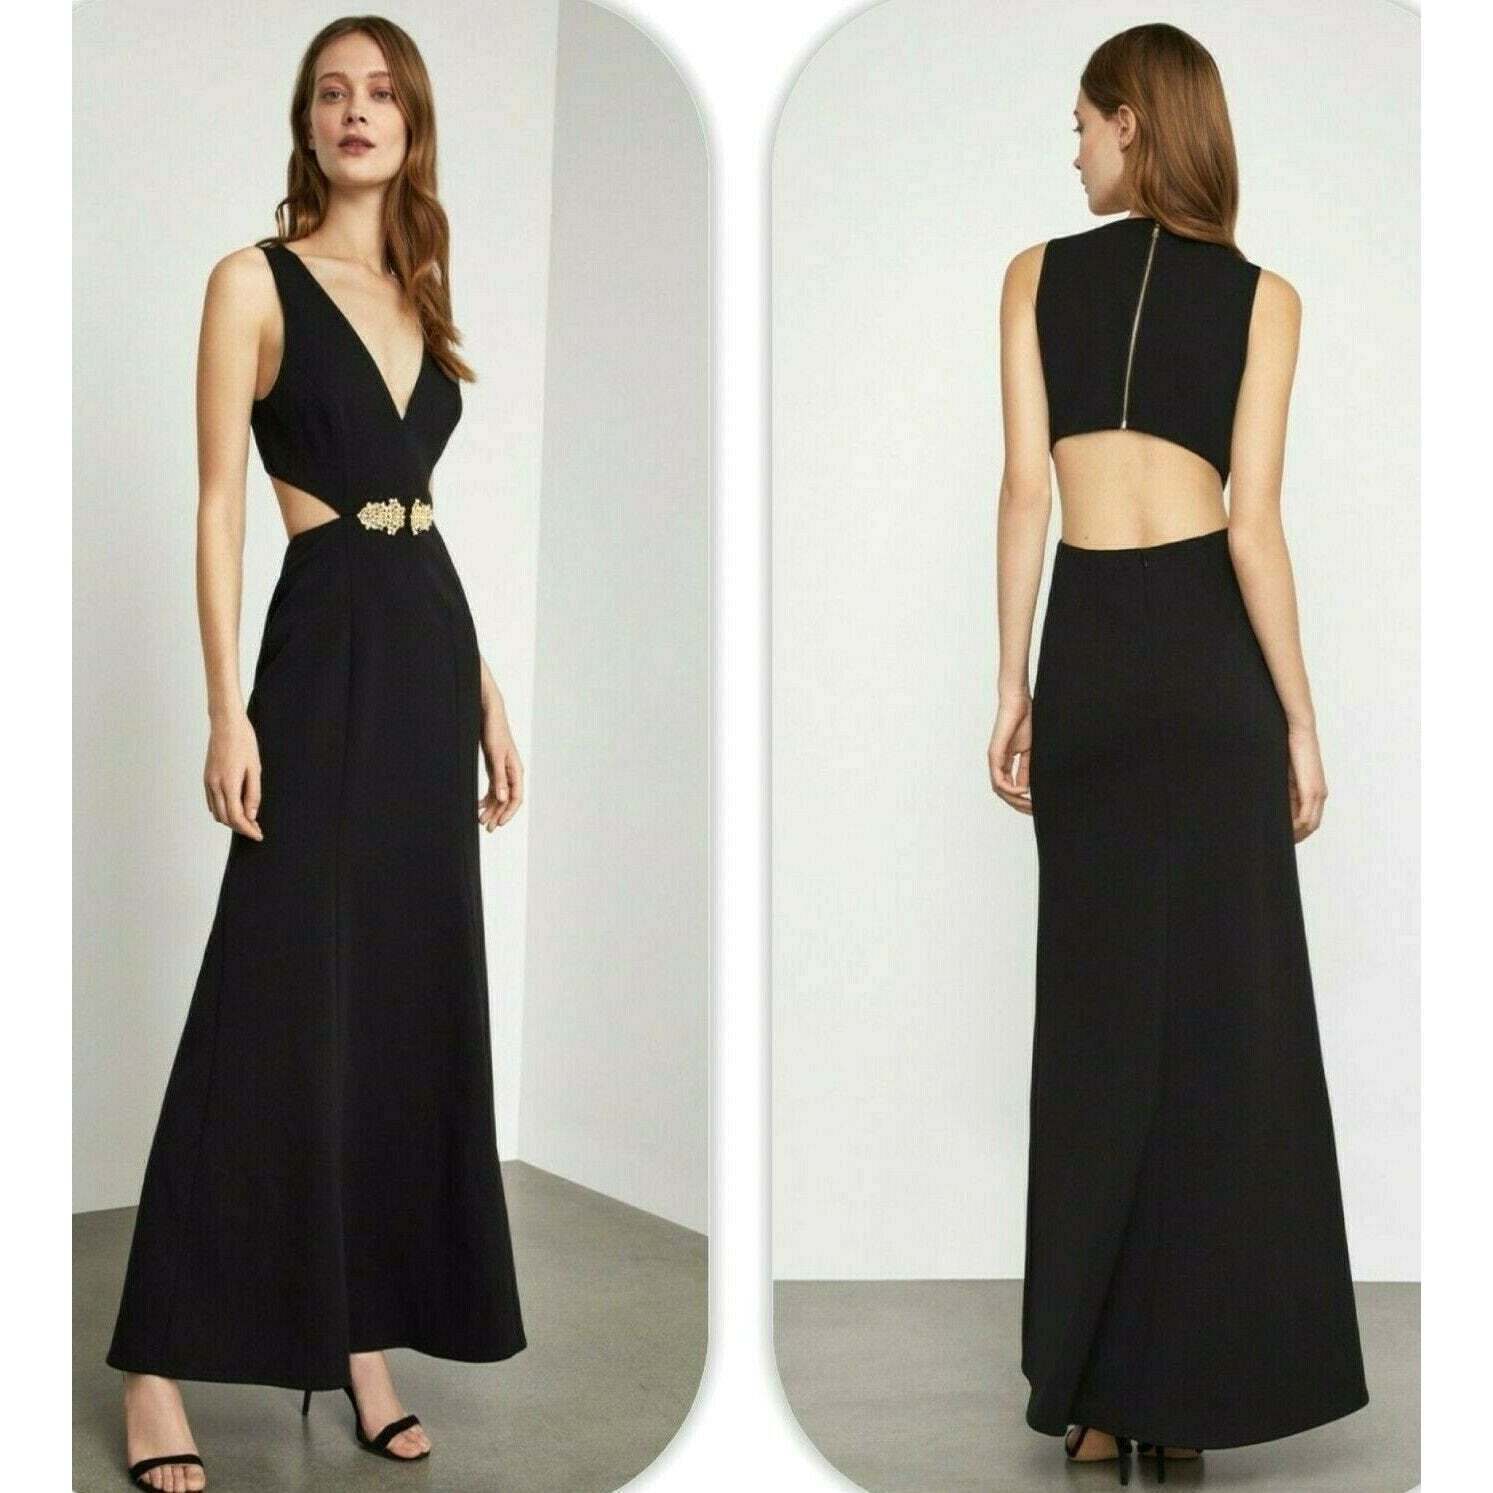 Primary image for BCBG Max Azria Brooch-Trimmed Cutout Gown NNH6219752, Size 8/Black